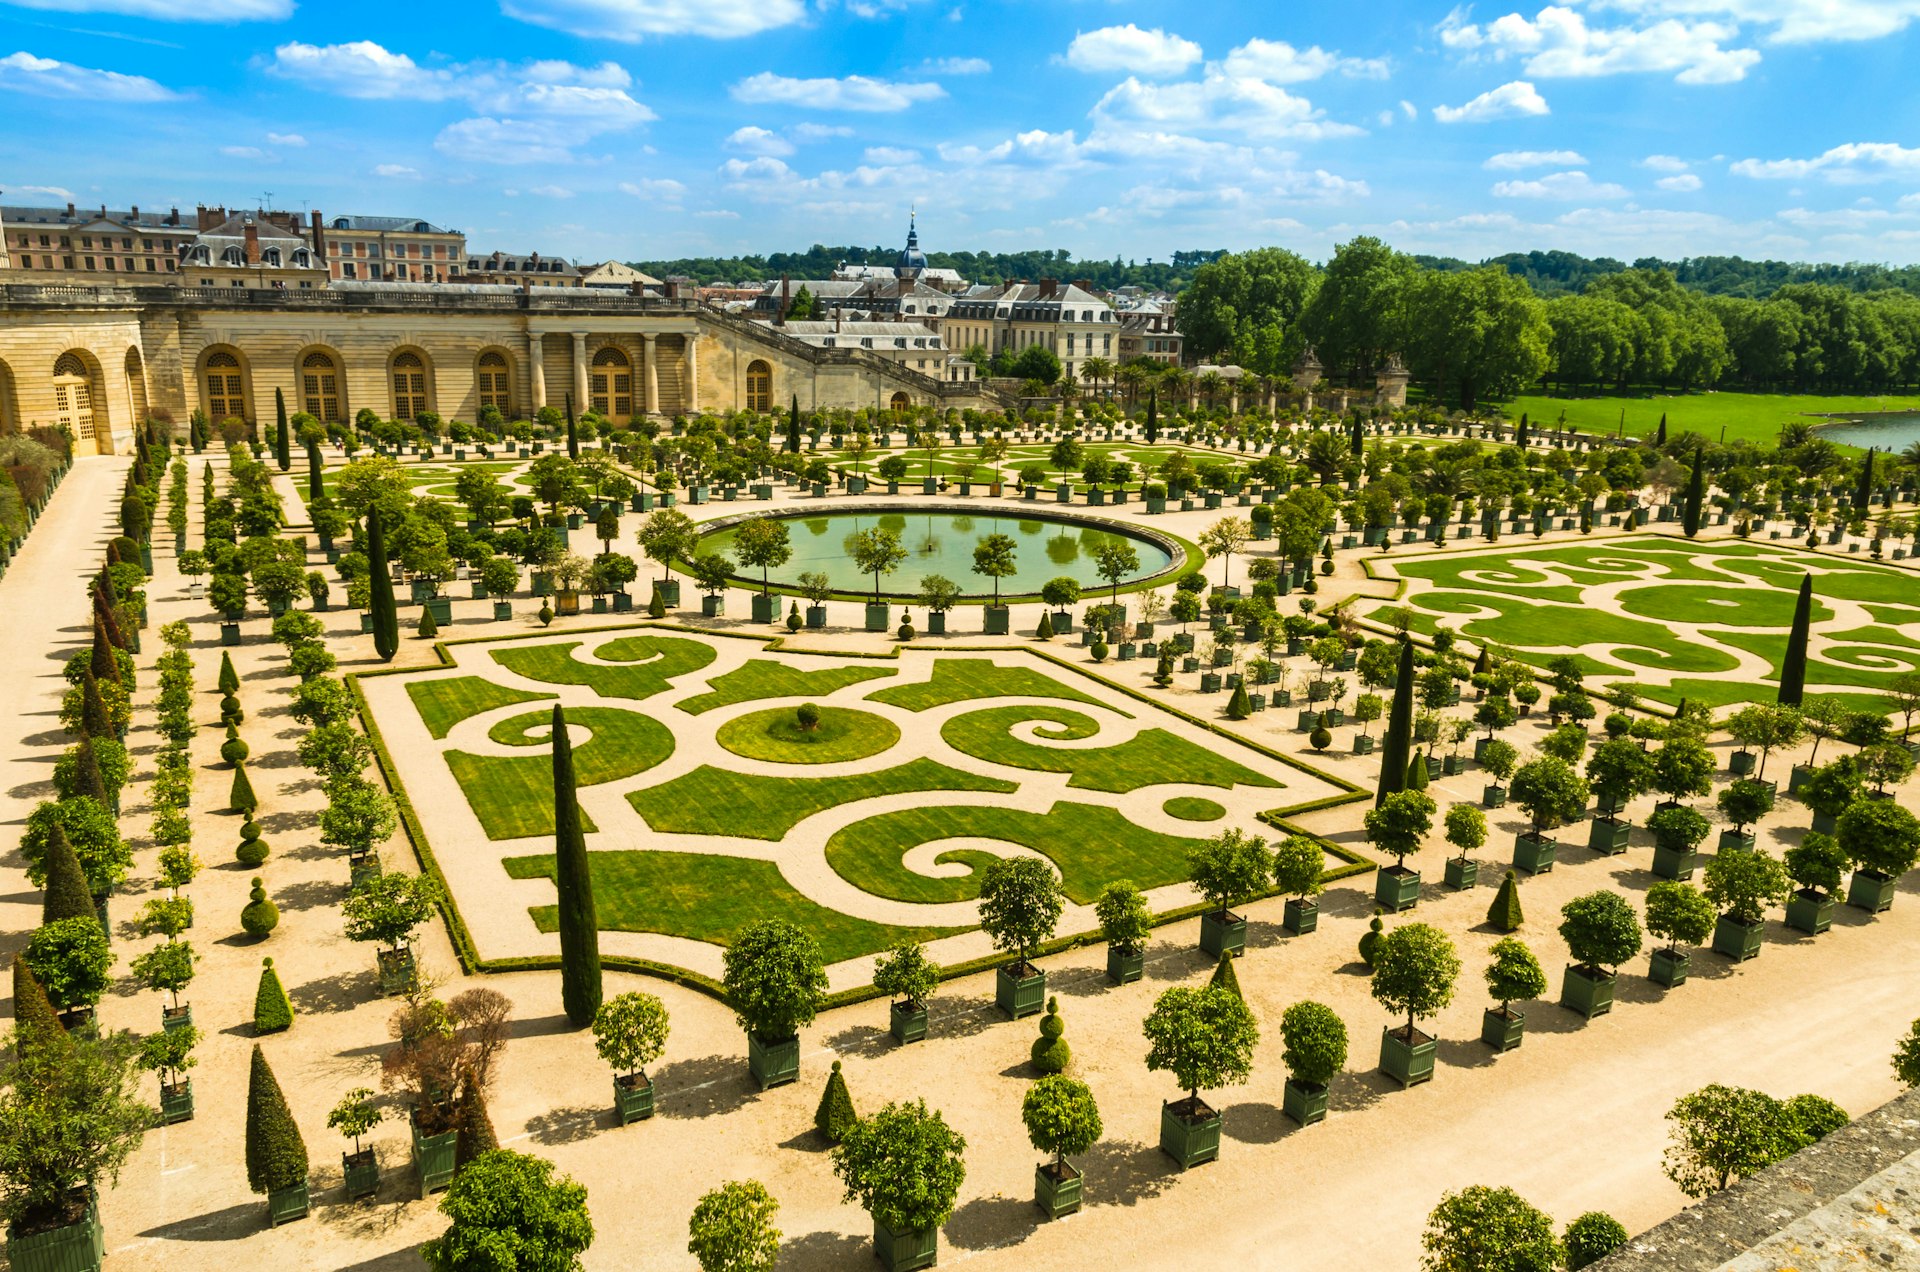 High-angle view of the manicured gardens of Versailles Palace